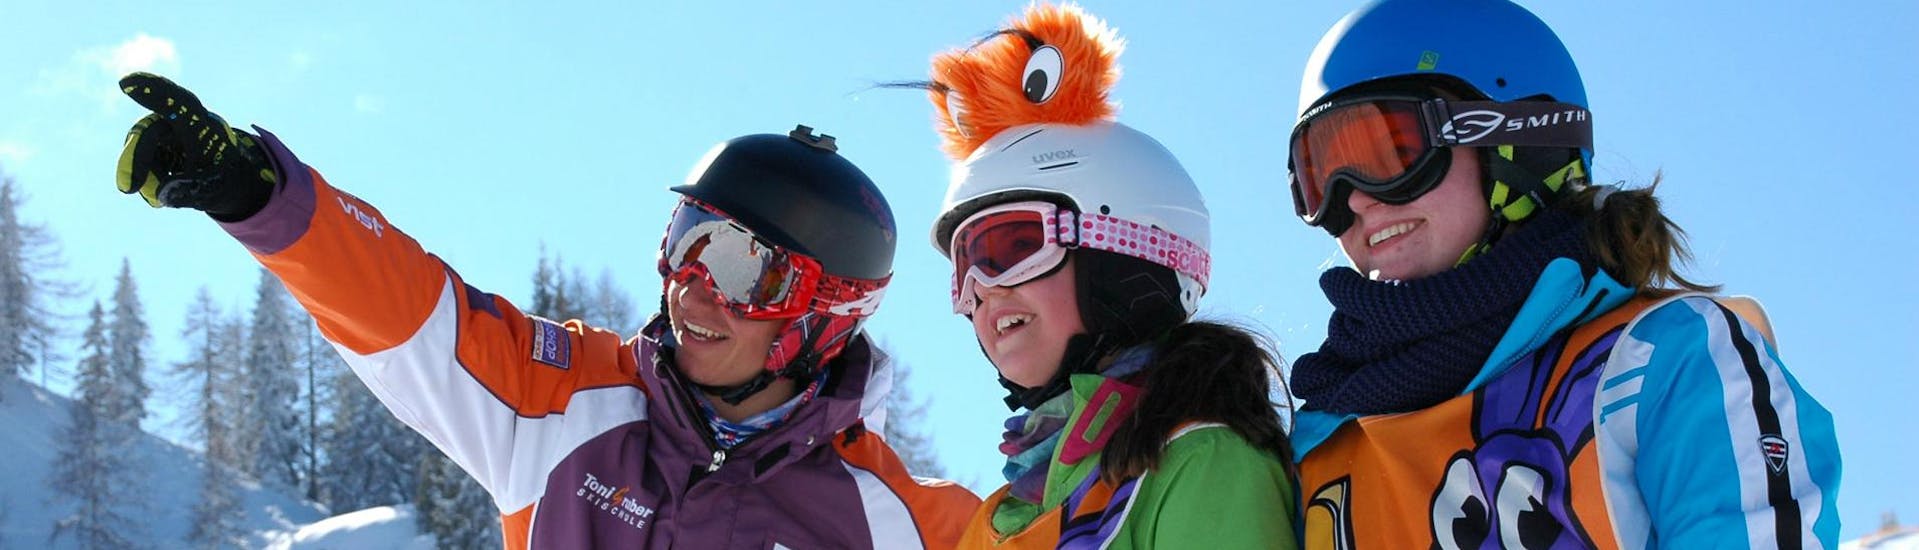 Kids Ski Lessons "Wild Rabbits" (4-14 y.) for Advanced Skiers in Großarl.